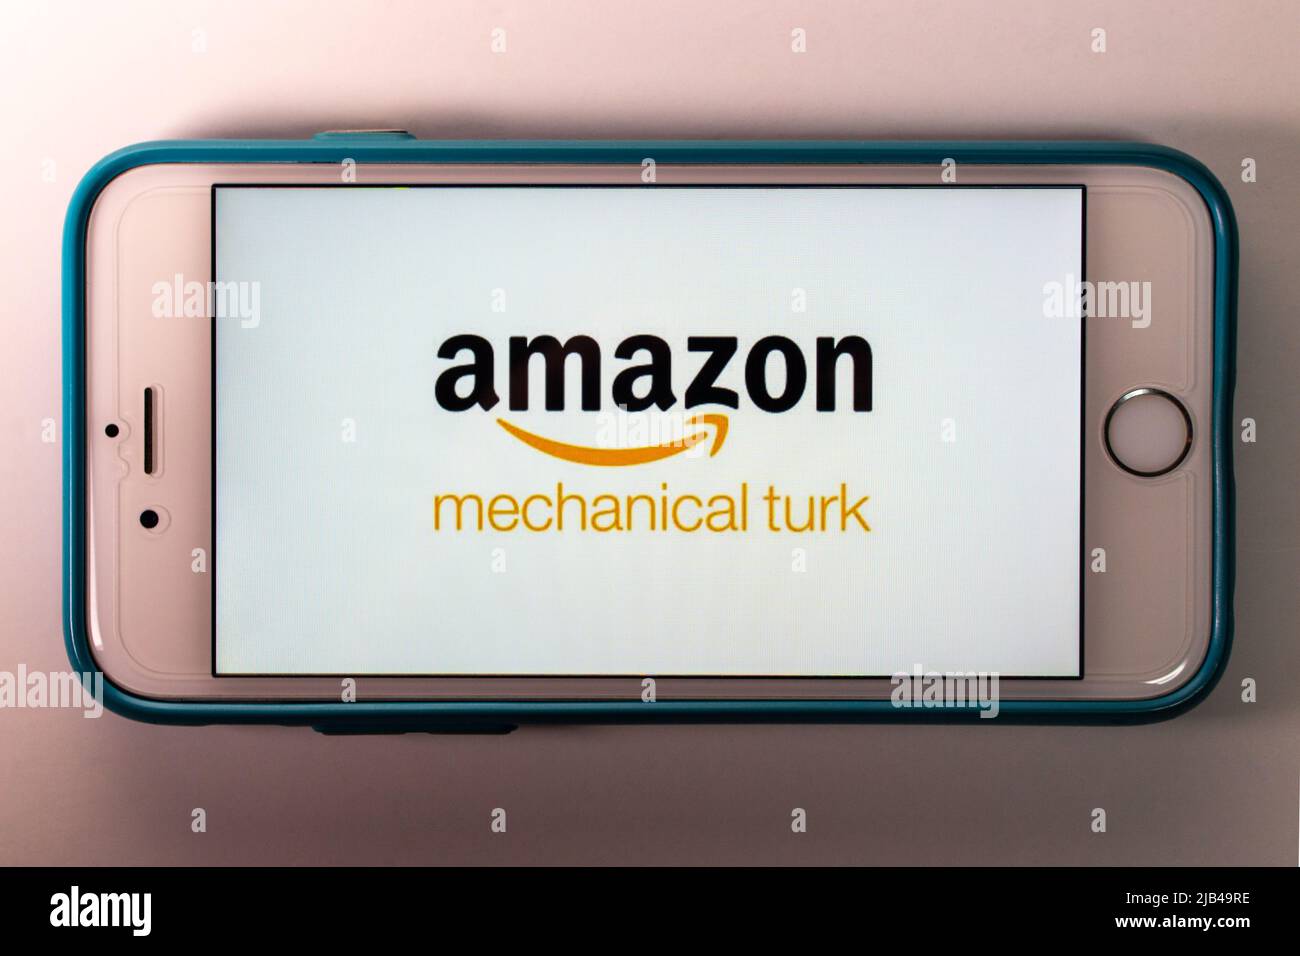 Logo of Amazon Mechanical Turk (MTurk), crowdsourcing website to hire crowdworkers for on-demand tasks that computers are unable to do, on iPhone Stock Photo